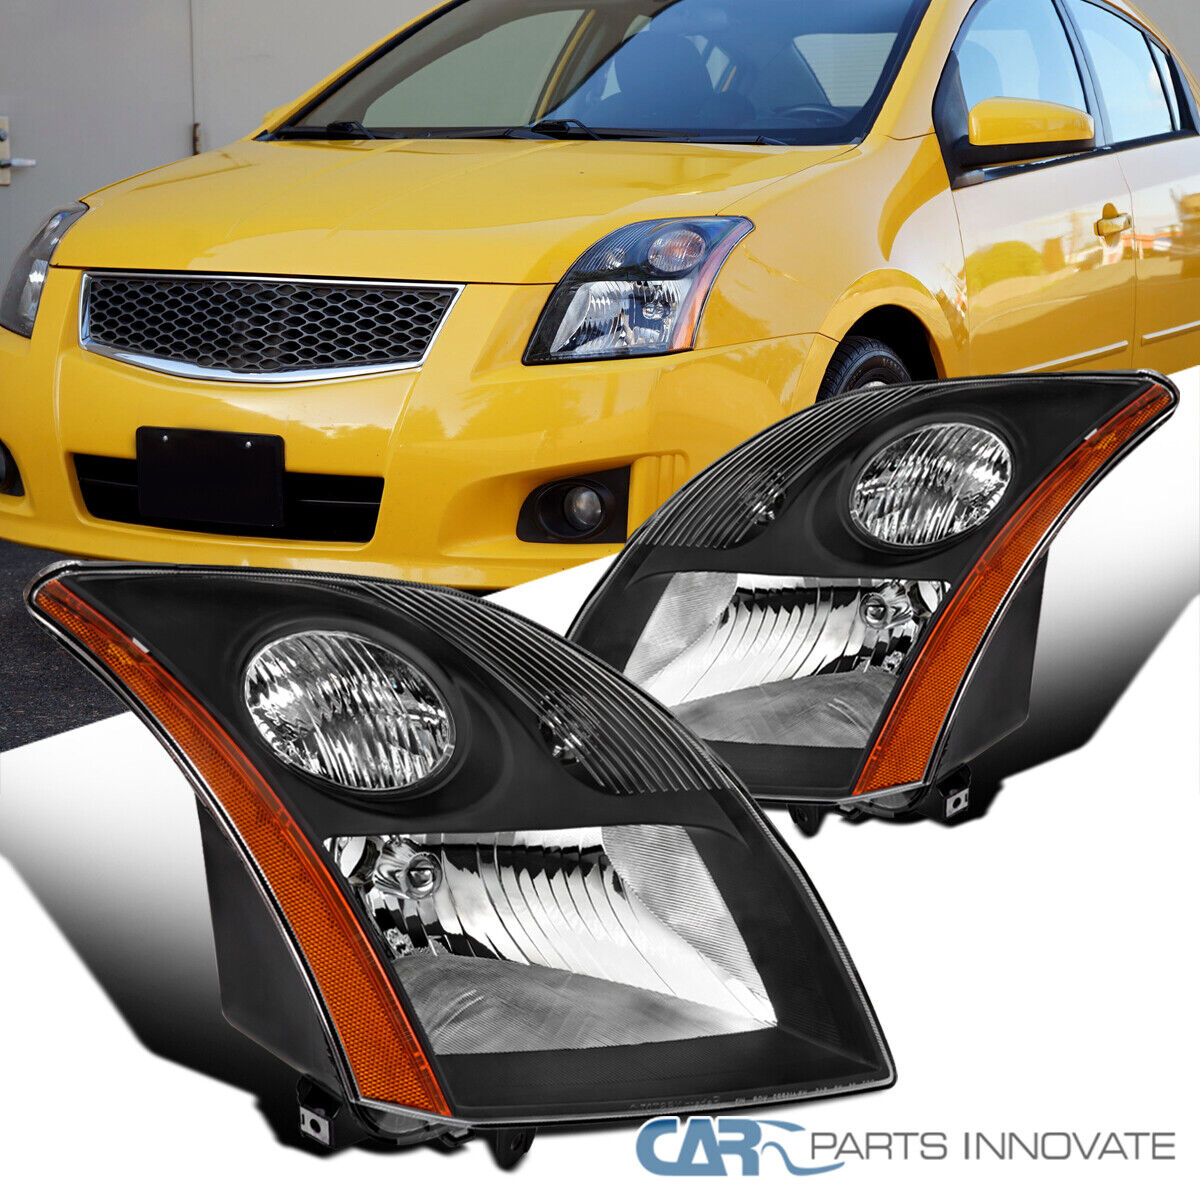 Black Fits 2007-2009 Nissan Sentra Headlights Head Lamps Assembly Left+Right